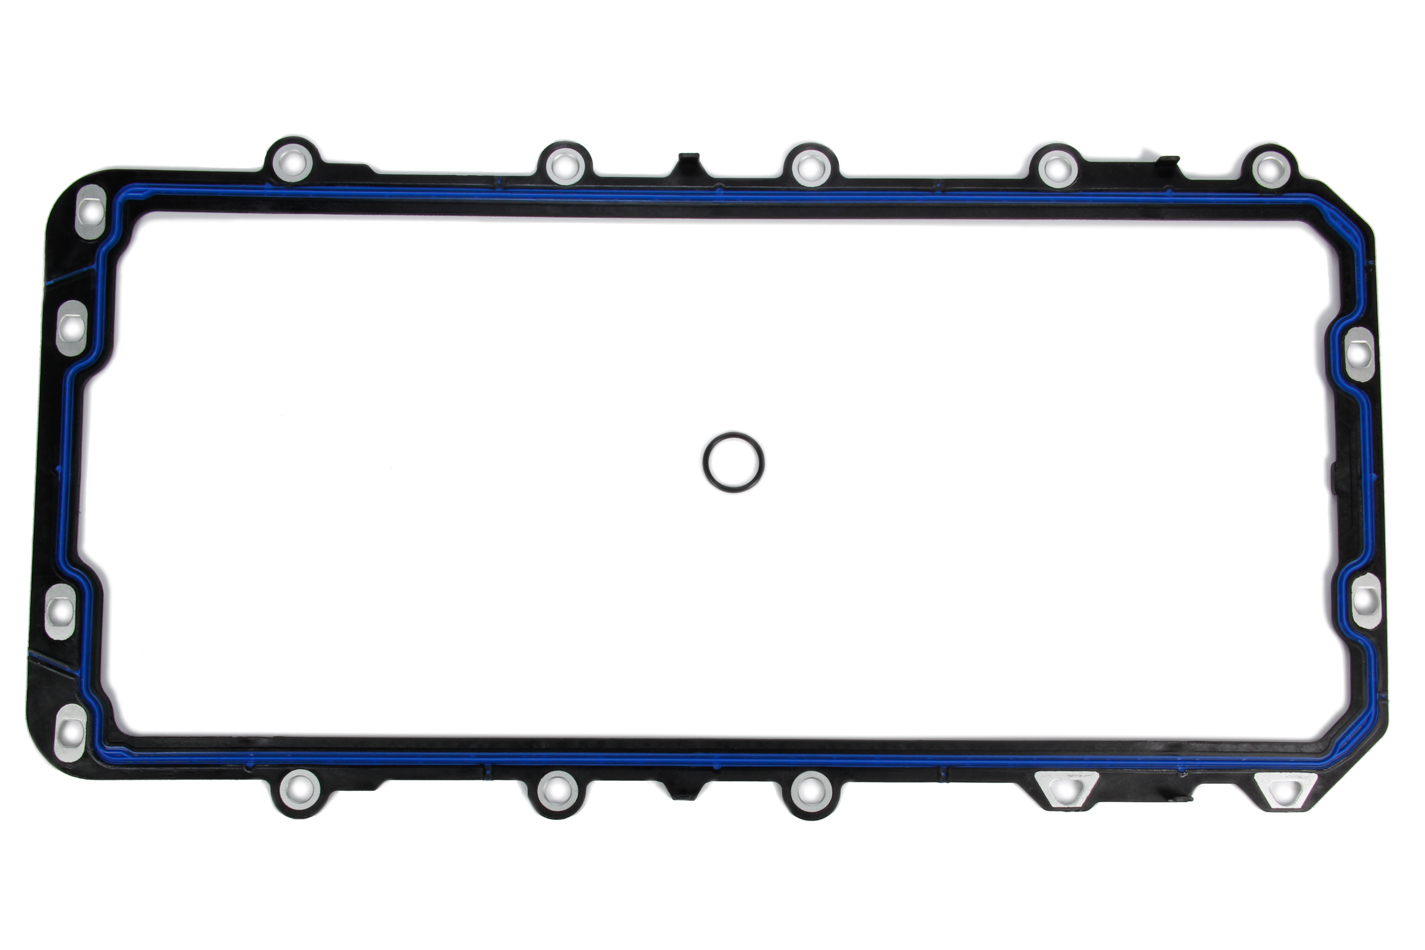 Fel Pro OS30725R - Oil Pan Gasket, 1 Piece, Silicone Rubber / Plastic, Ford Modular, Each